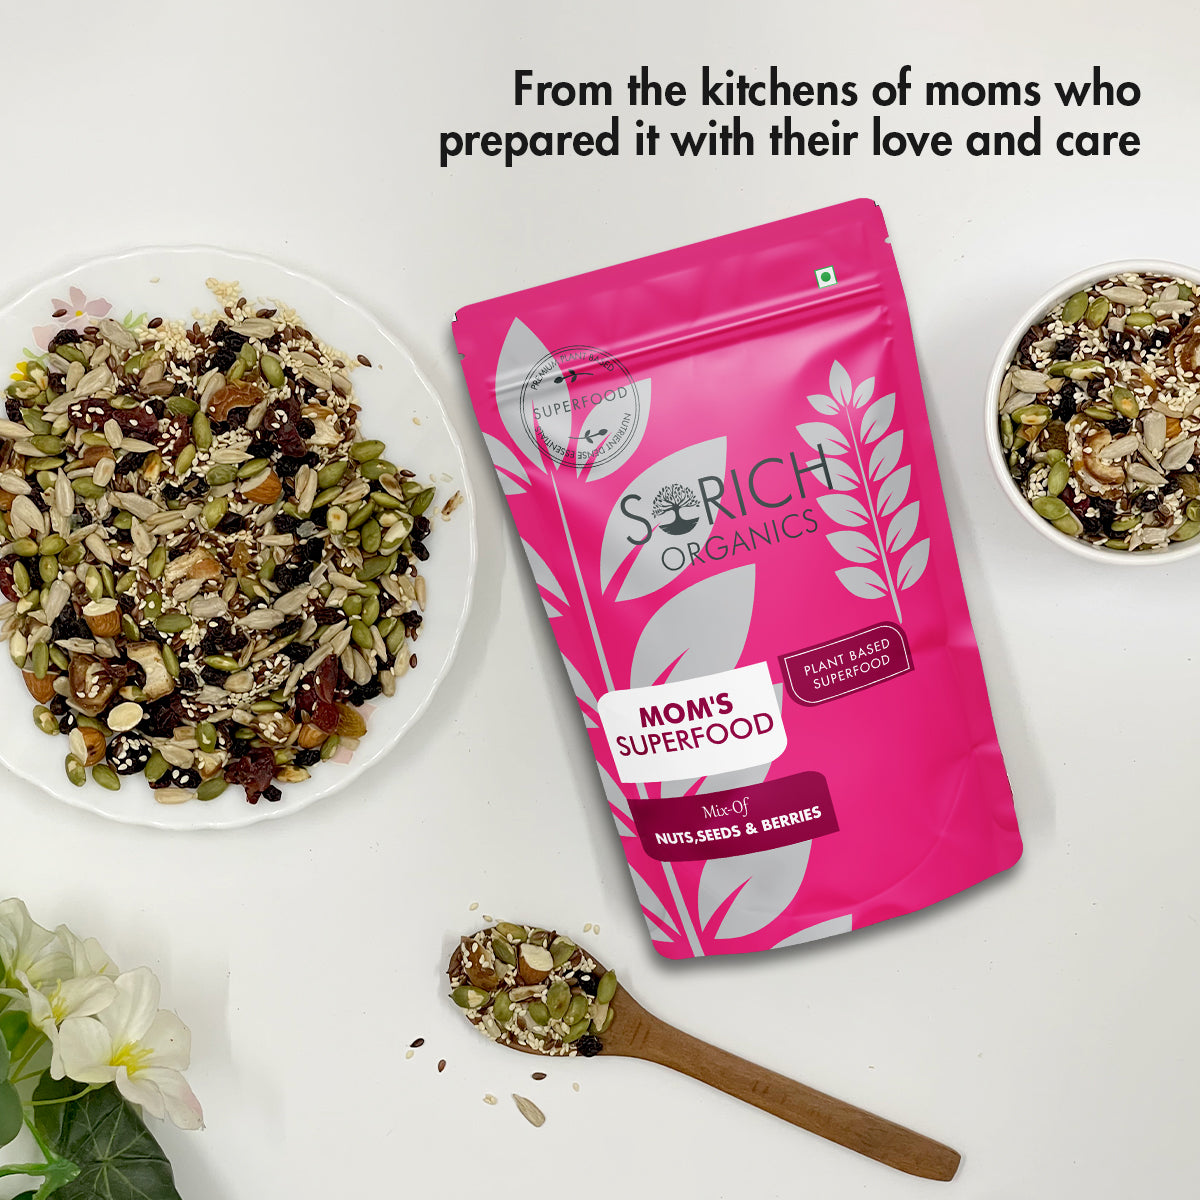 Mom's Superfood Mix  - Sorich